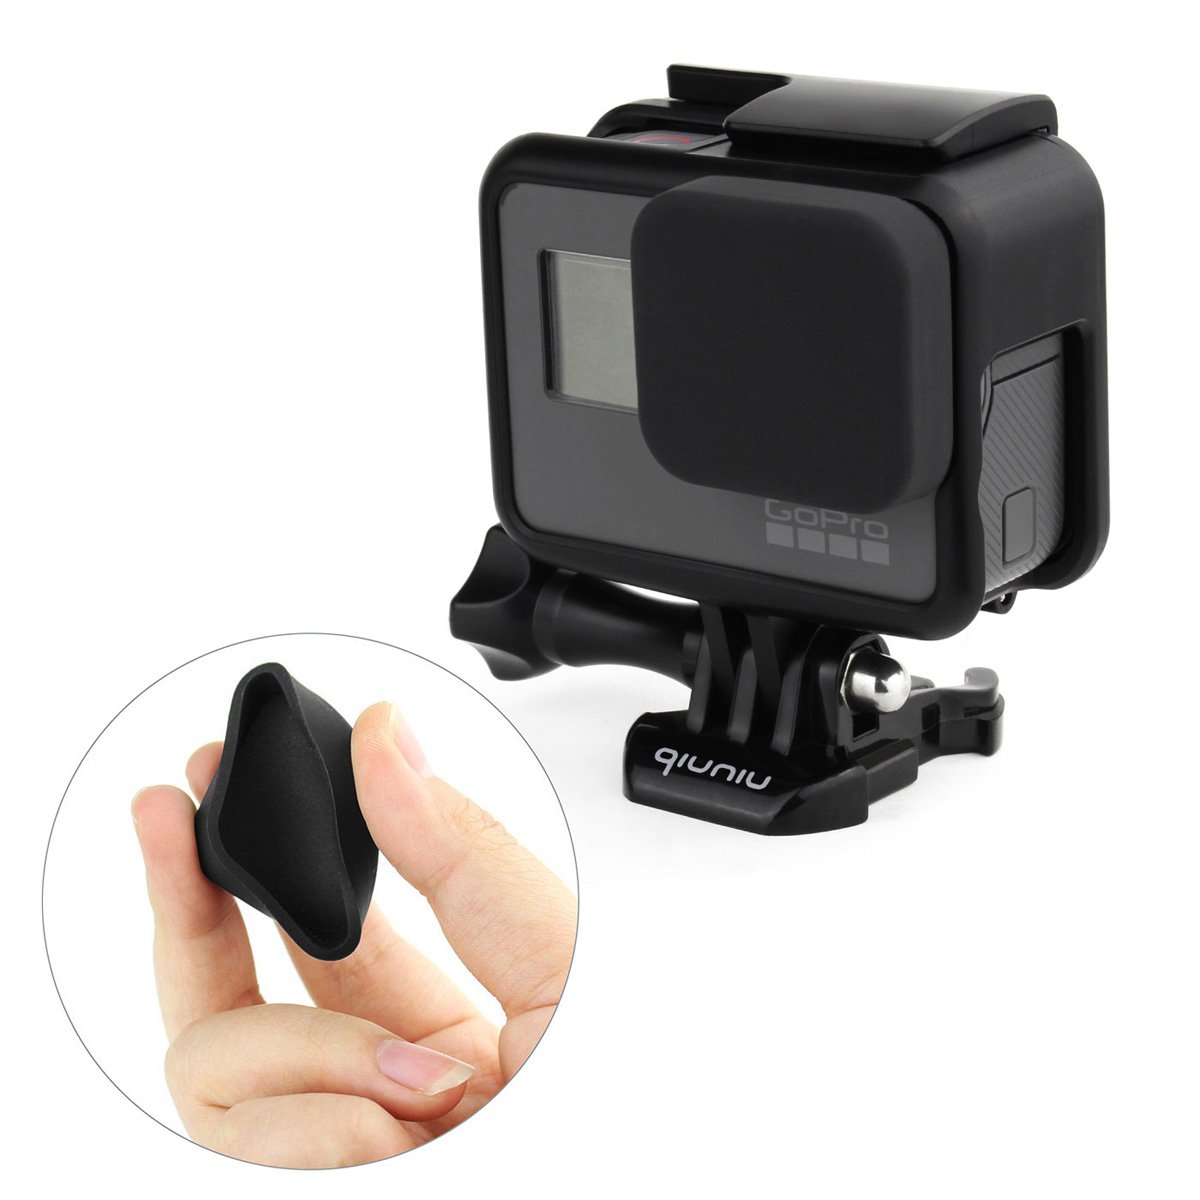 Frame Mount Housing Case for GoPro Hero 5/6/7 Black Action Camera - Protective Case with Quick Release Buckle, Long Thumb Bolt Screw, and Lens Cap - Black